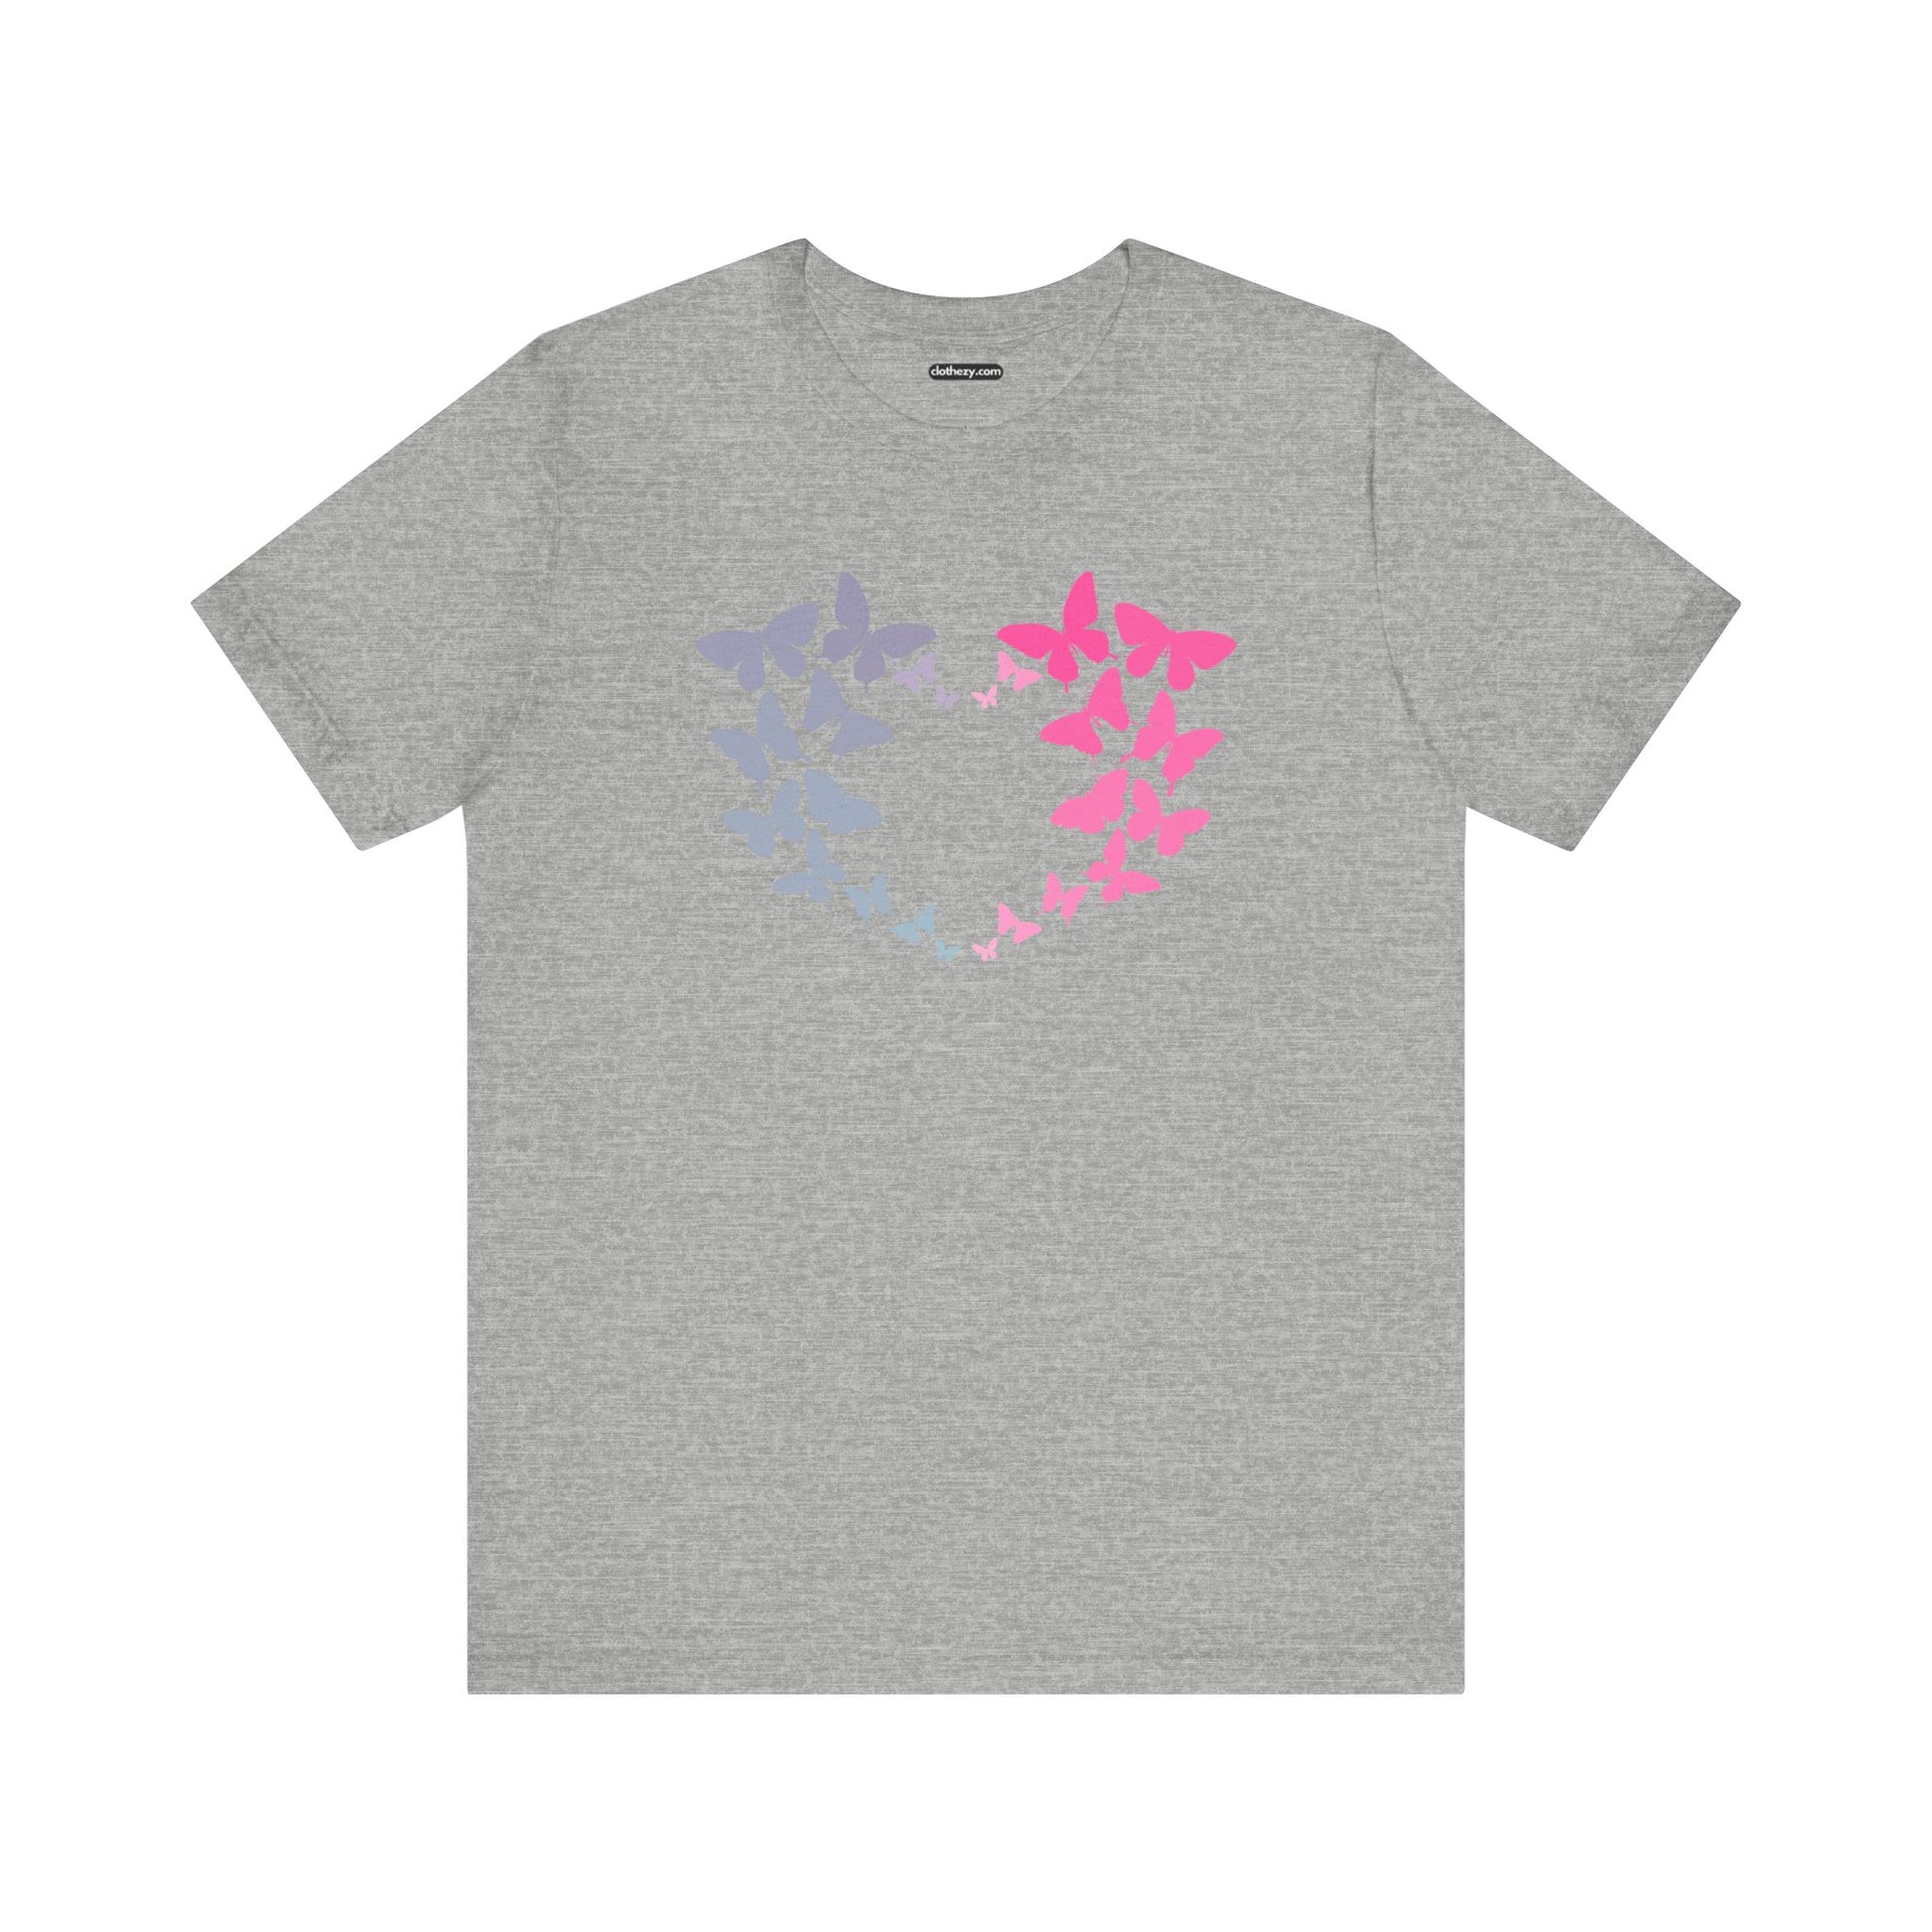 Grey and Pink Butterfly Heart - Soft Cotton Adult Unisex T-Shirt, Gift for friends and family, Gift for friends and family by clothezy.com - Buy Now